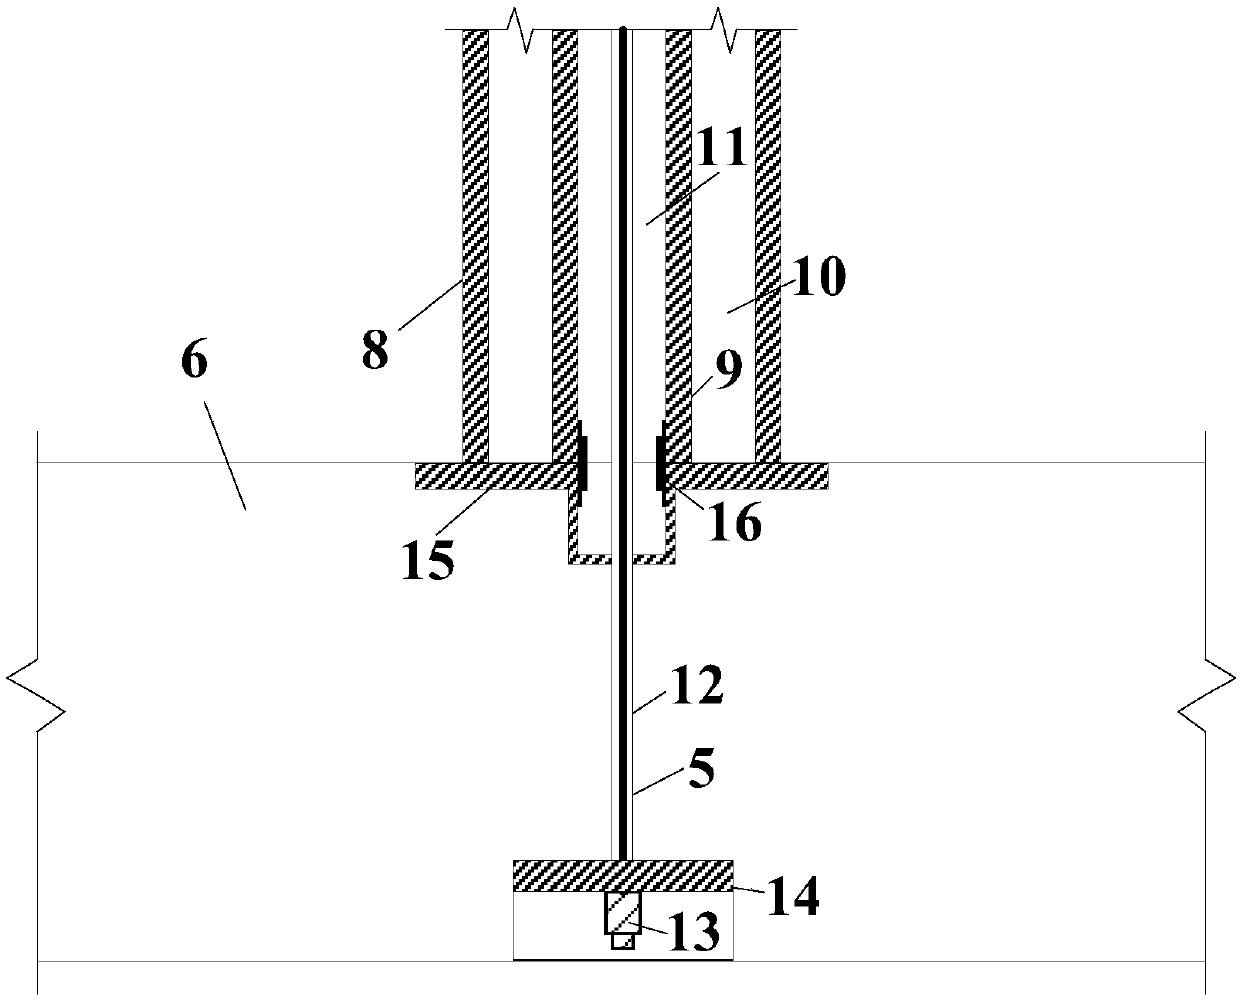 Energy-dissipation self-resetting double-layer rectangular hollow concrete-filled steel tube swing pier structure system